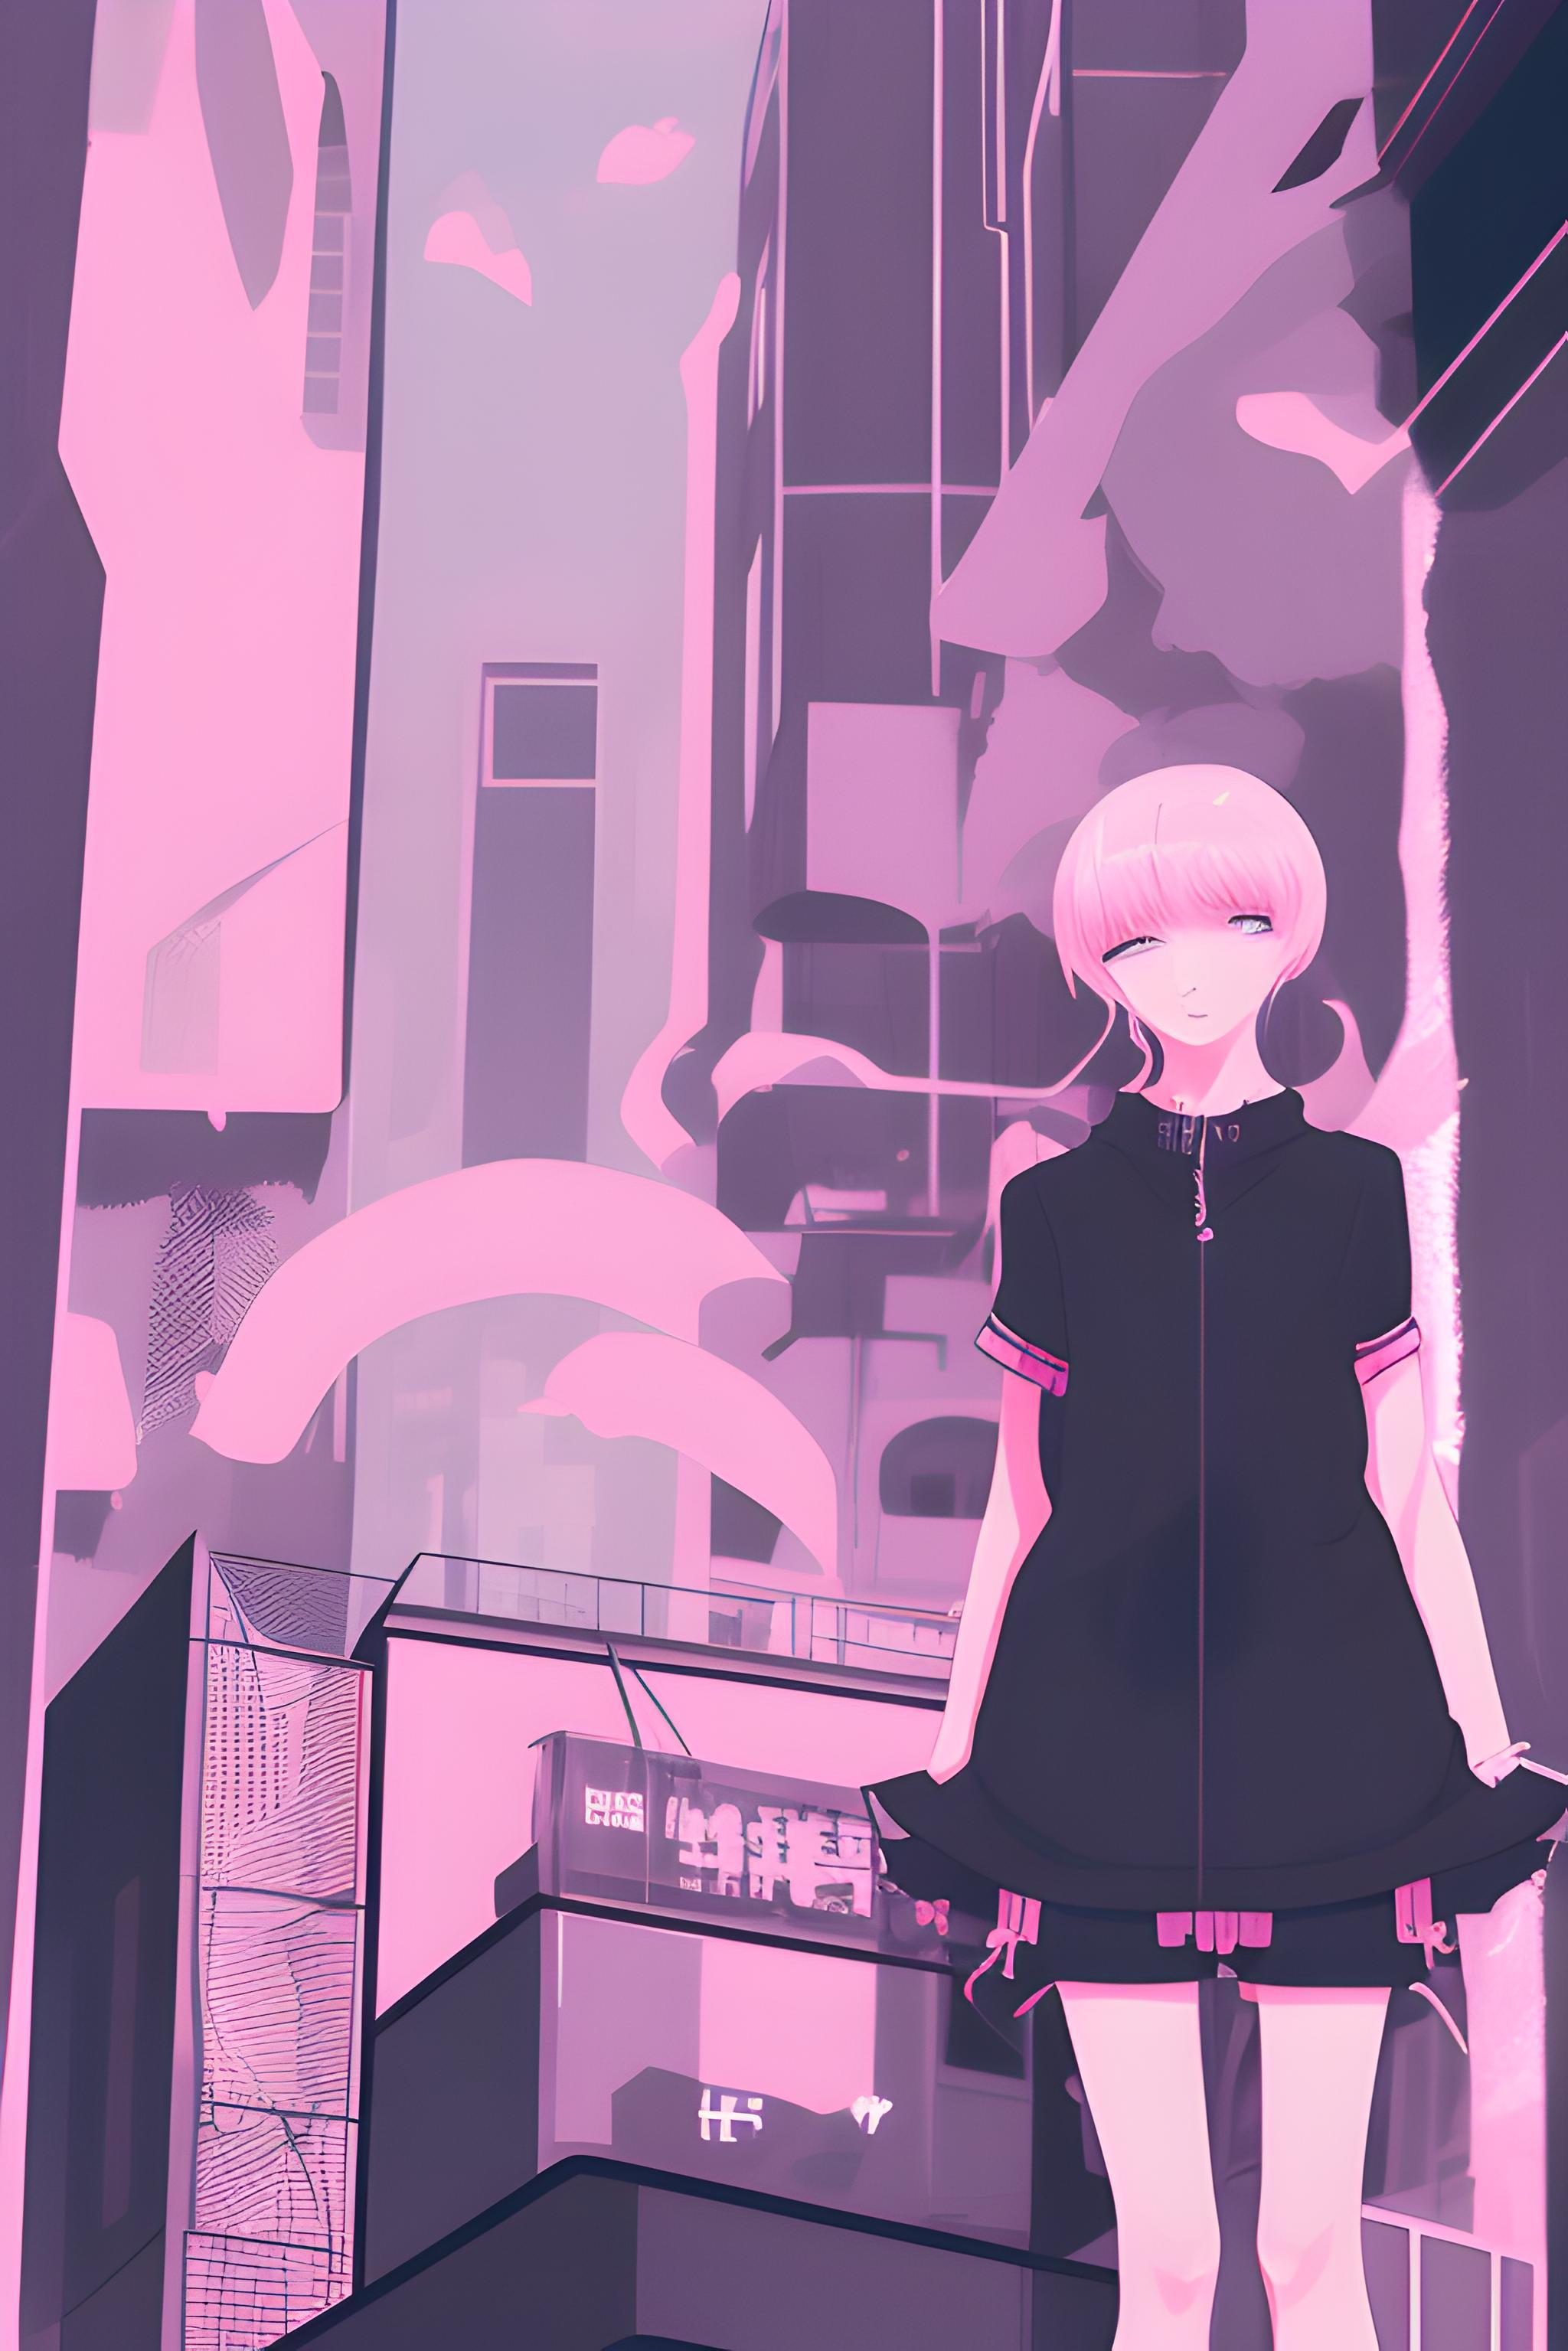 A Black And Pink Themed Wallpaper Anime Styled Classic Street